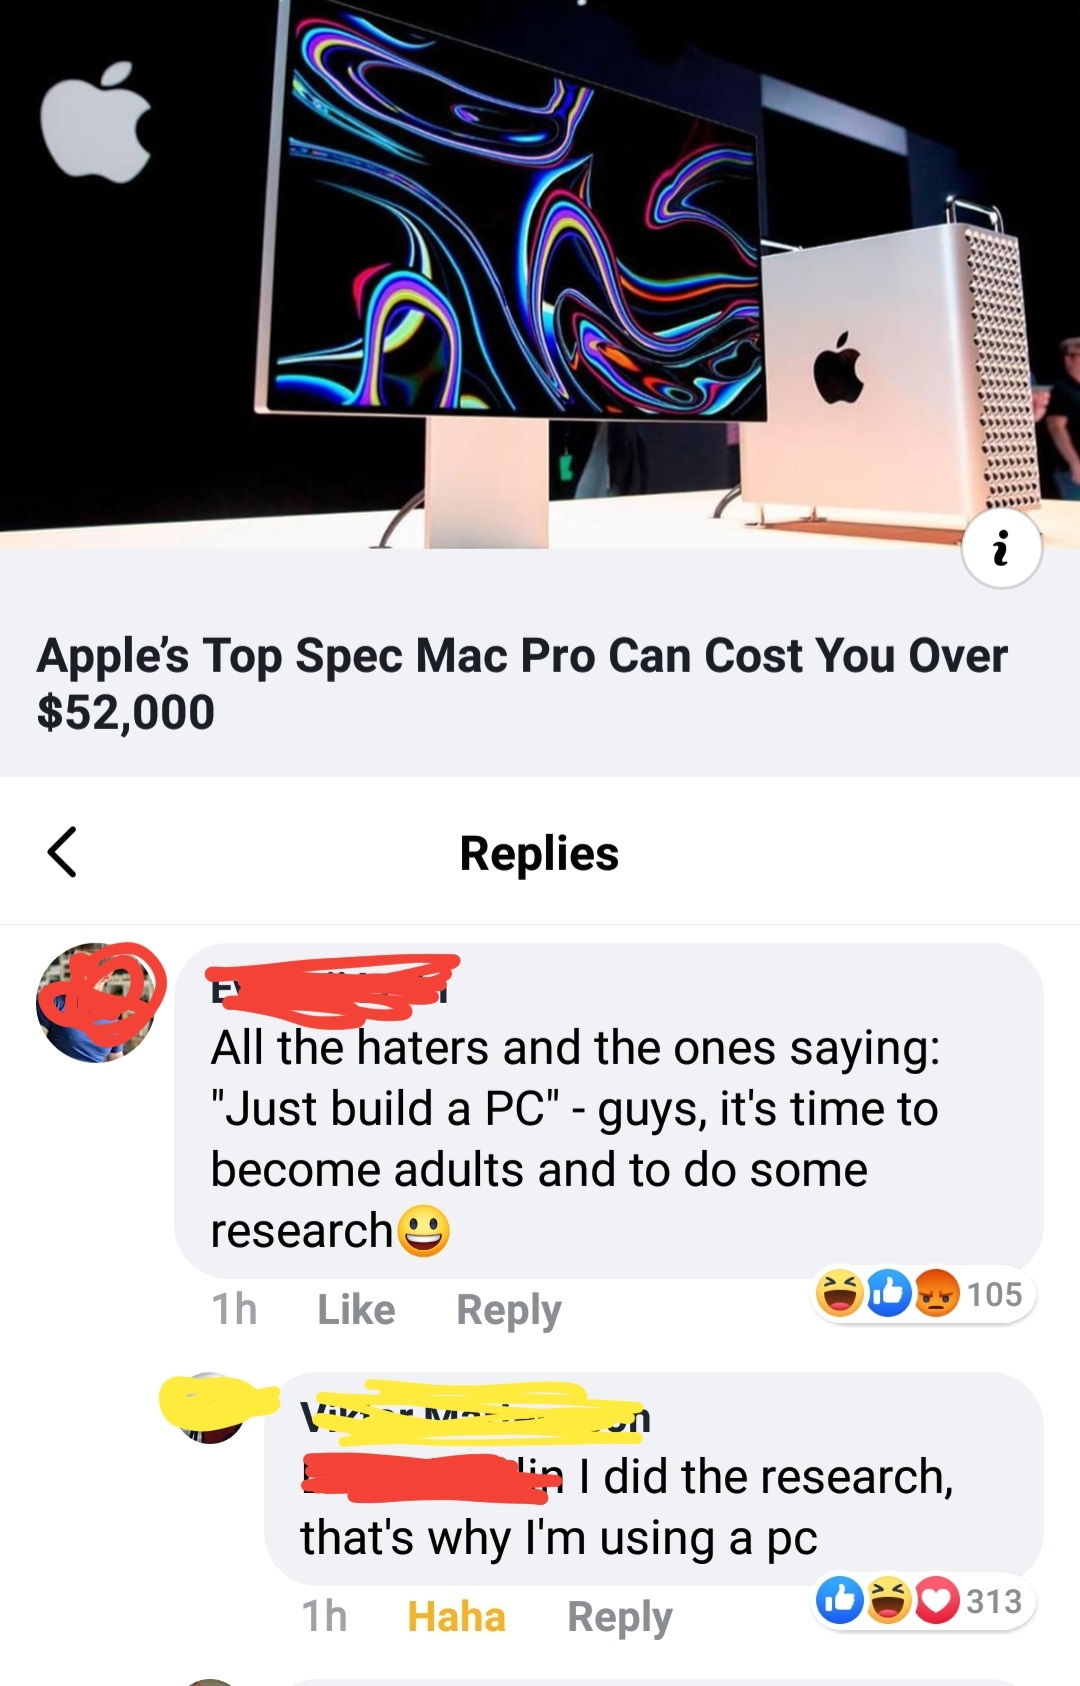 wwdc 2019 mac pro - Apple's Top Spec Mac Pro Can Cost You Over $52,000 Replies All the haters and the ones saying "Just build a Pc" guys, it's time to become adults and to do some research 1h 3D105 lin I did the research, that's why I'm using a pc 1h Haha